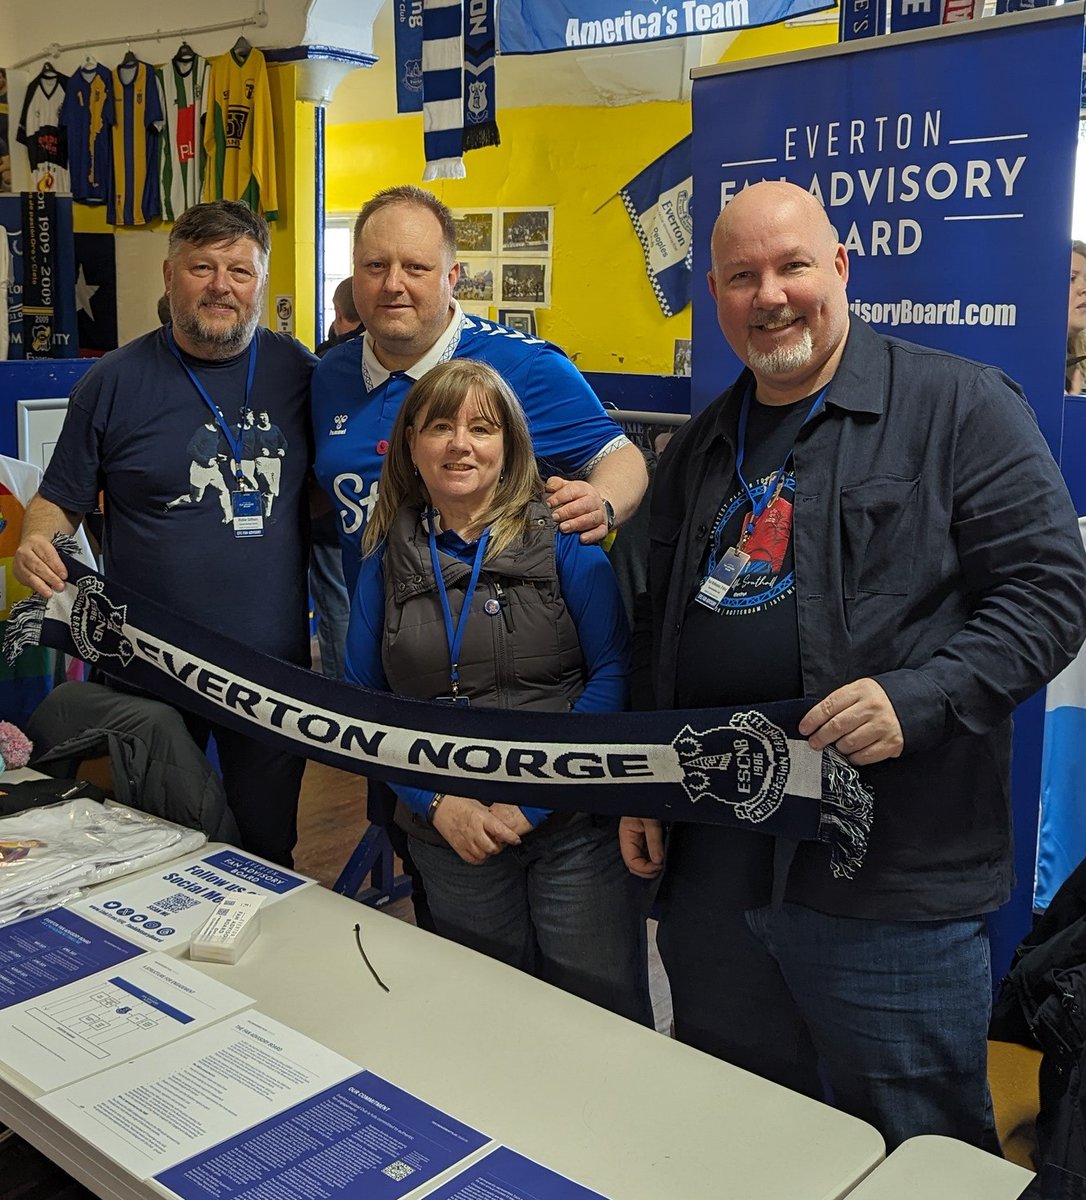 Great to get a visit from @HelgeGrunnevag - former @EFC_FanAdvisory and current @EFC_FansForum member along with some of his @efcnor colleagues 😁💙 We're here in St Luke's until 2.30pm - pop in if you can 💙